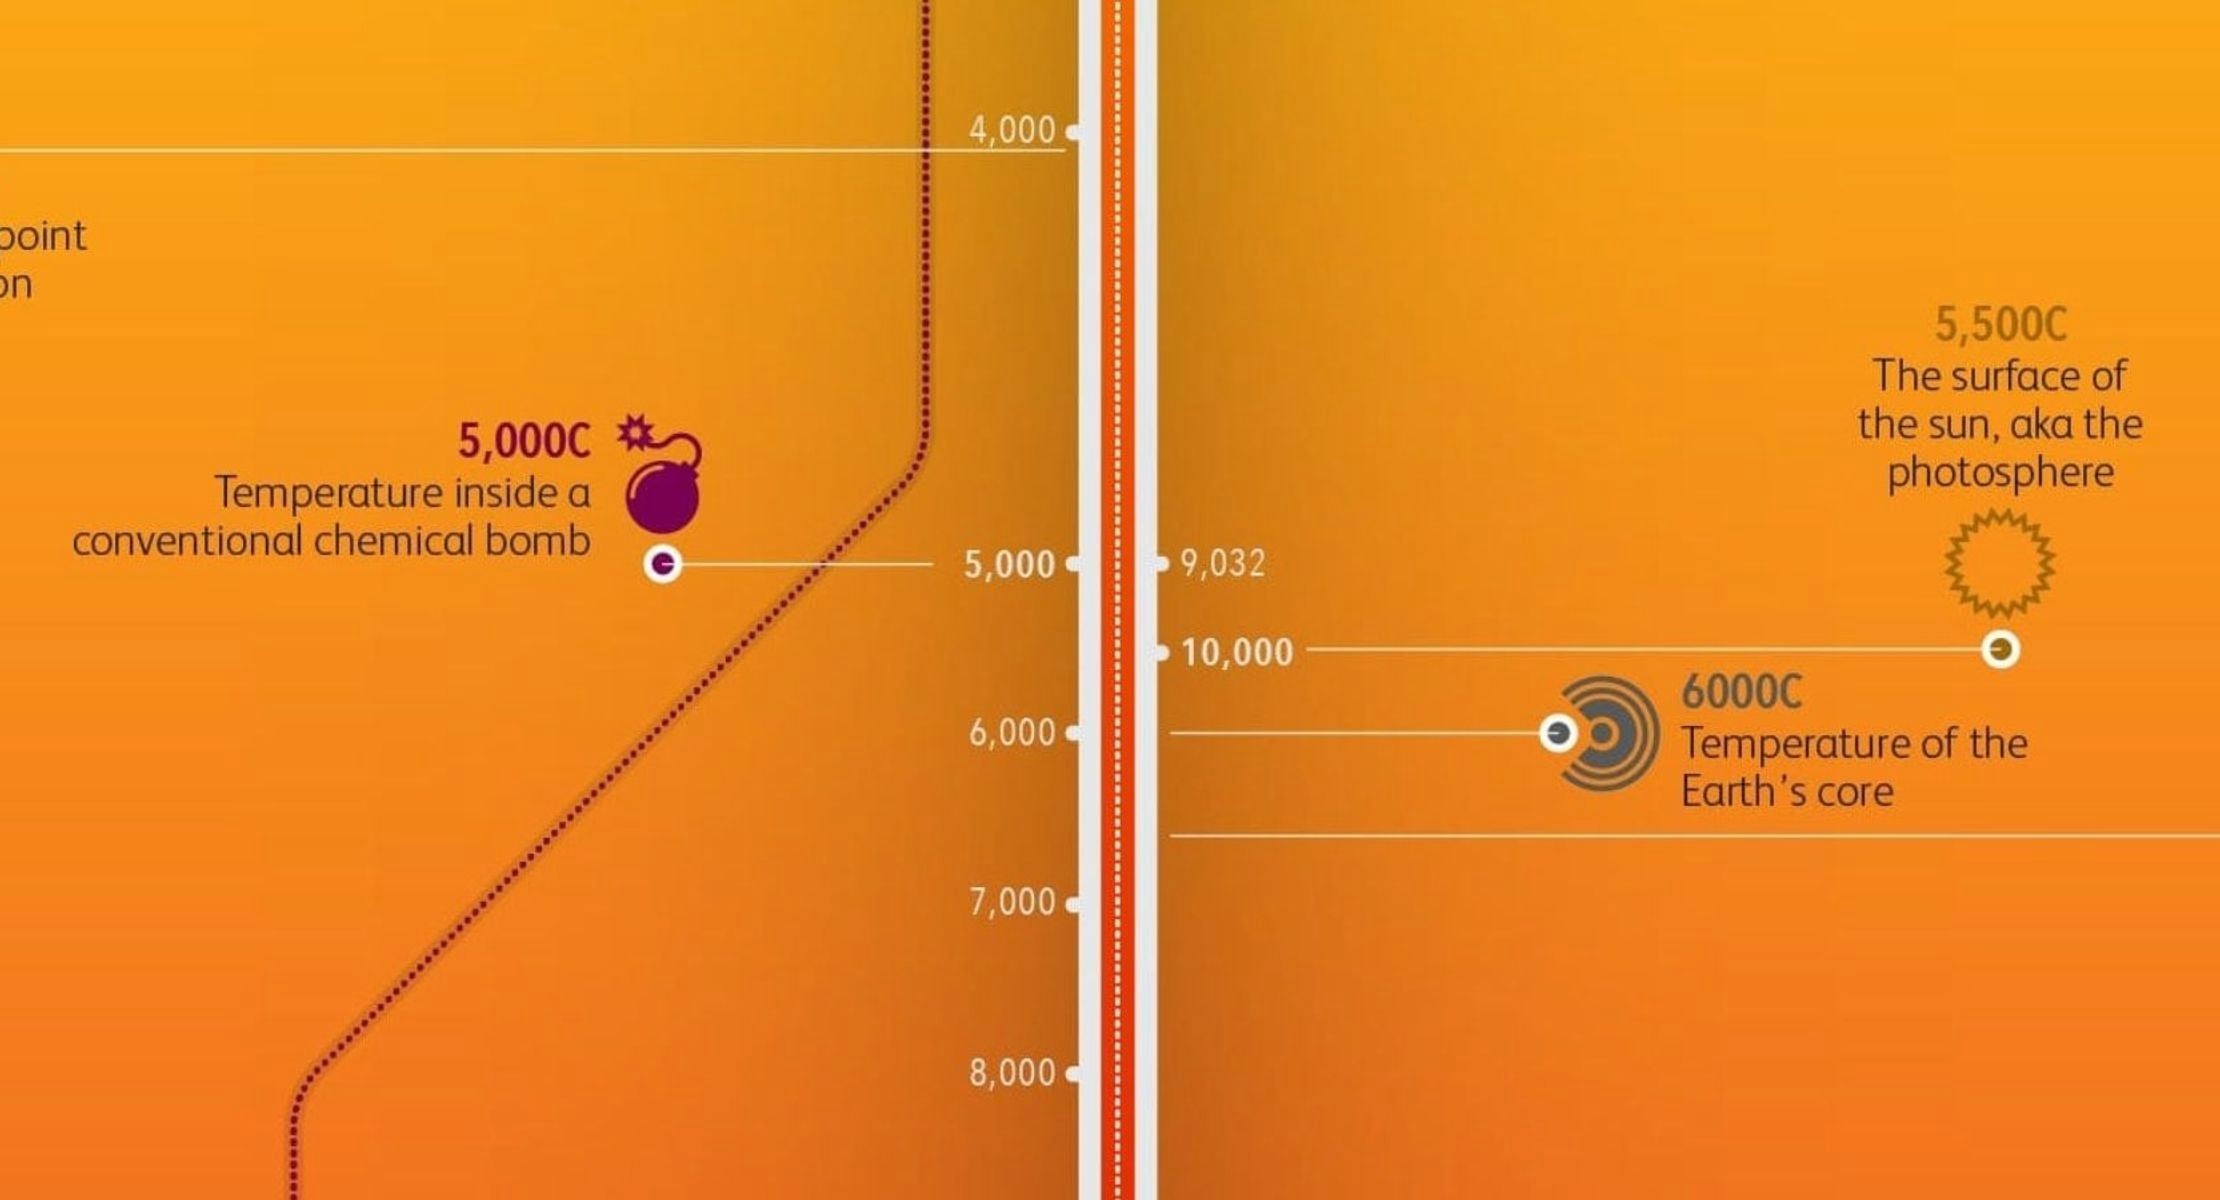 An imae of the Billion Degrees of Separation graphic. It shows a thermometer running vertically down the centre of the image with facts labelled on at different temperatures such as 6,000 degrees Celcius, the temperature of Earth's core.